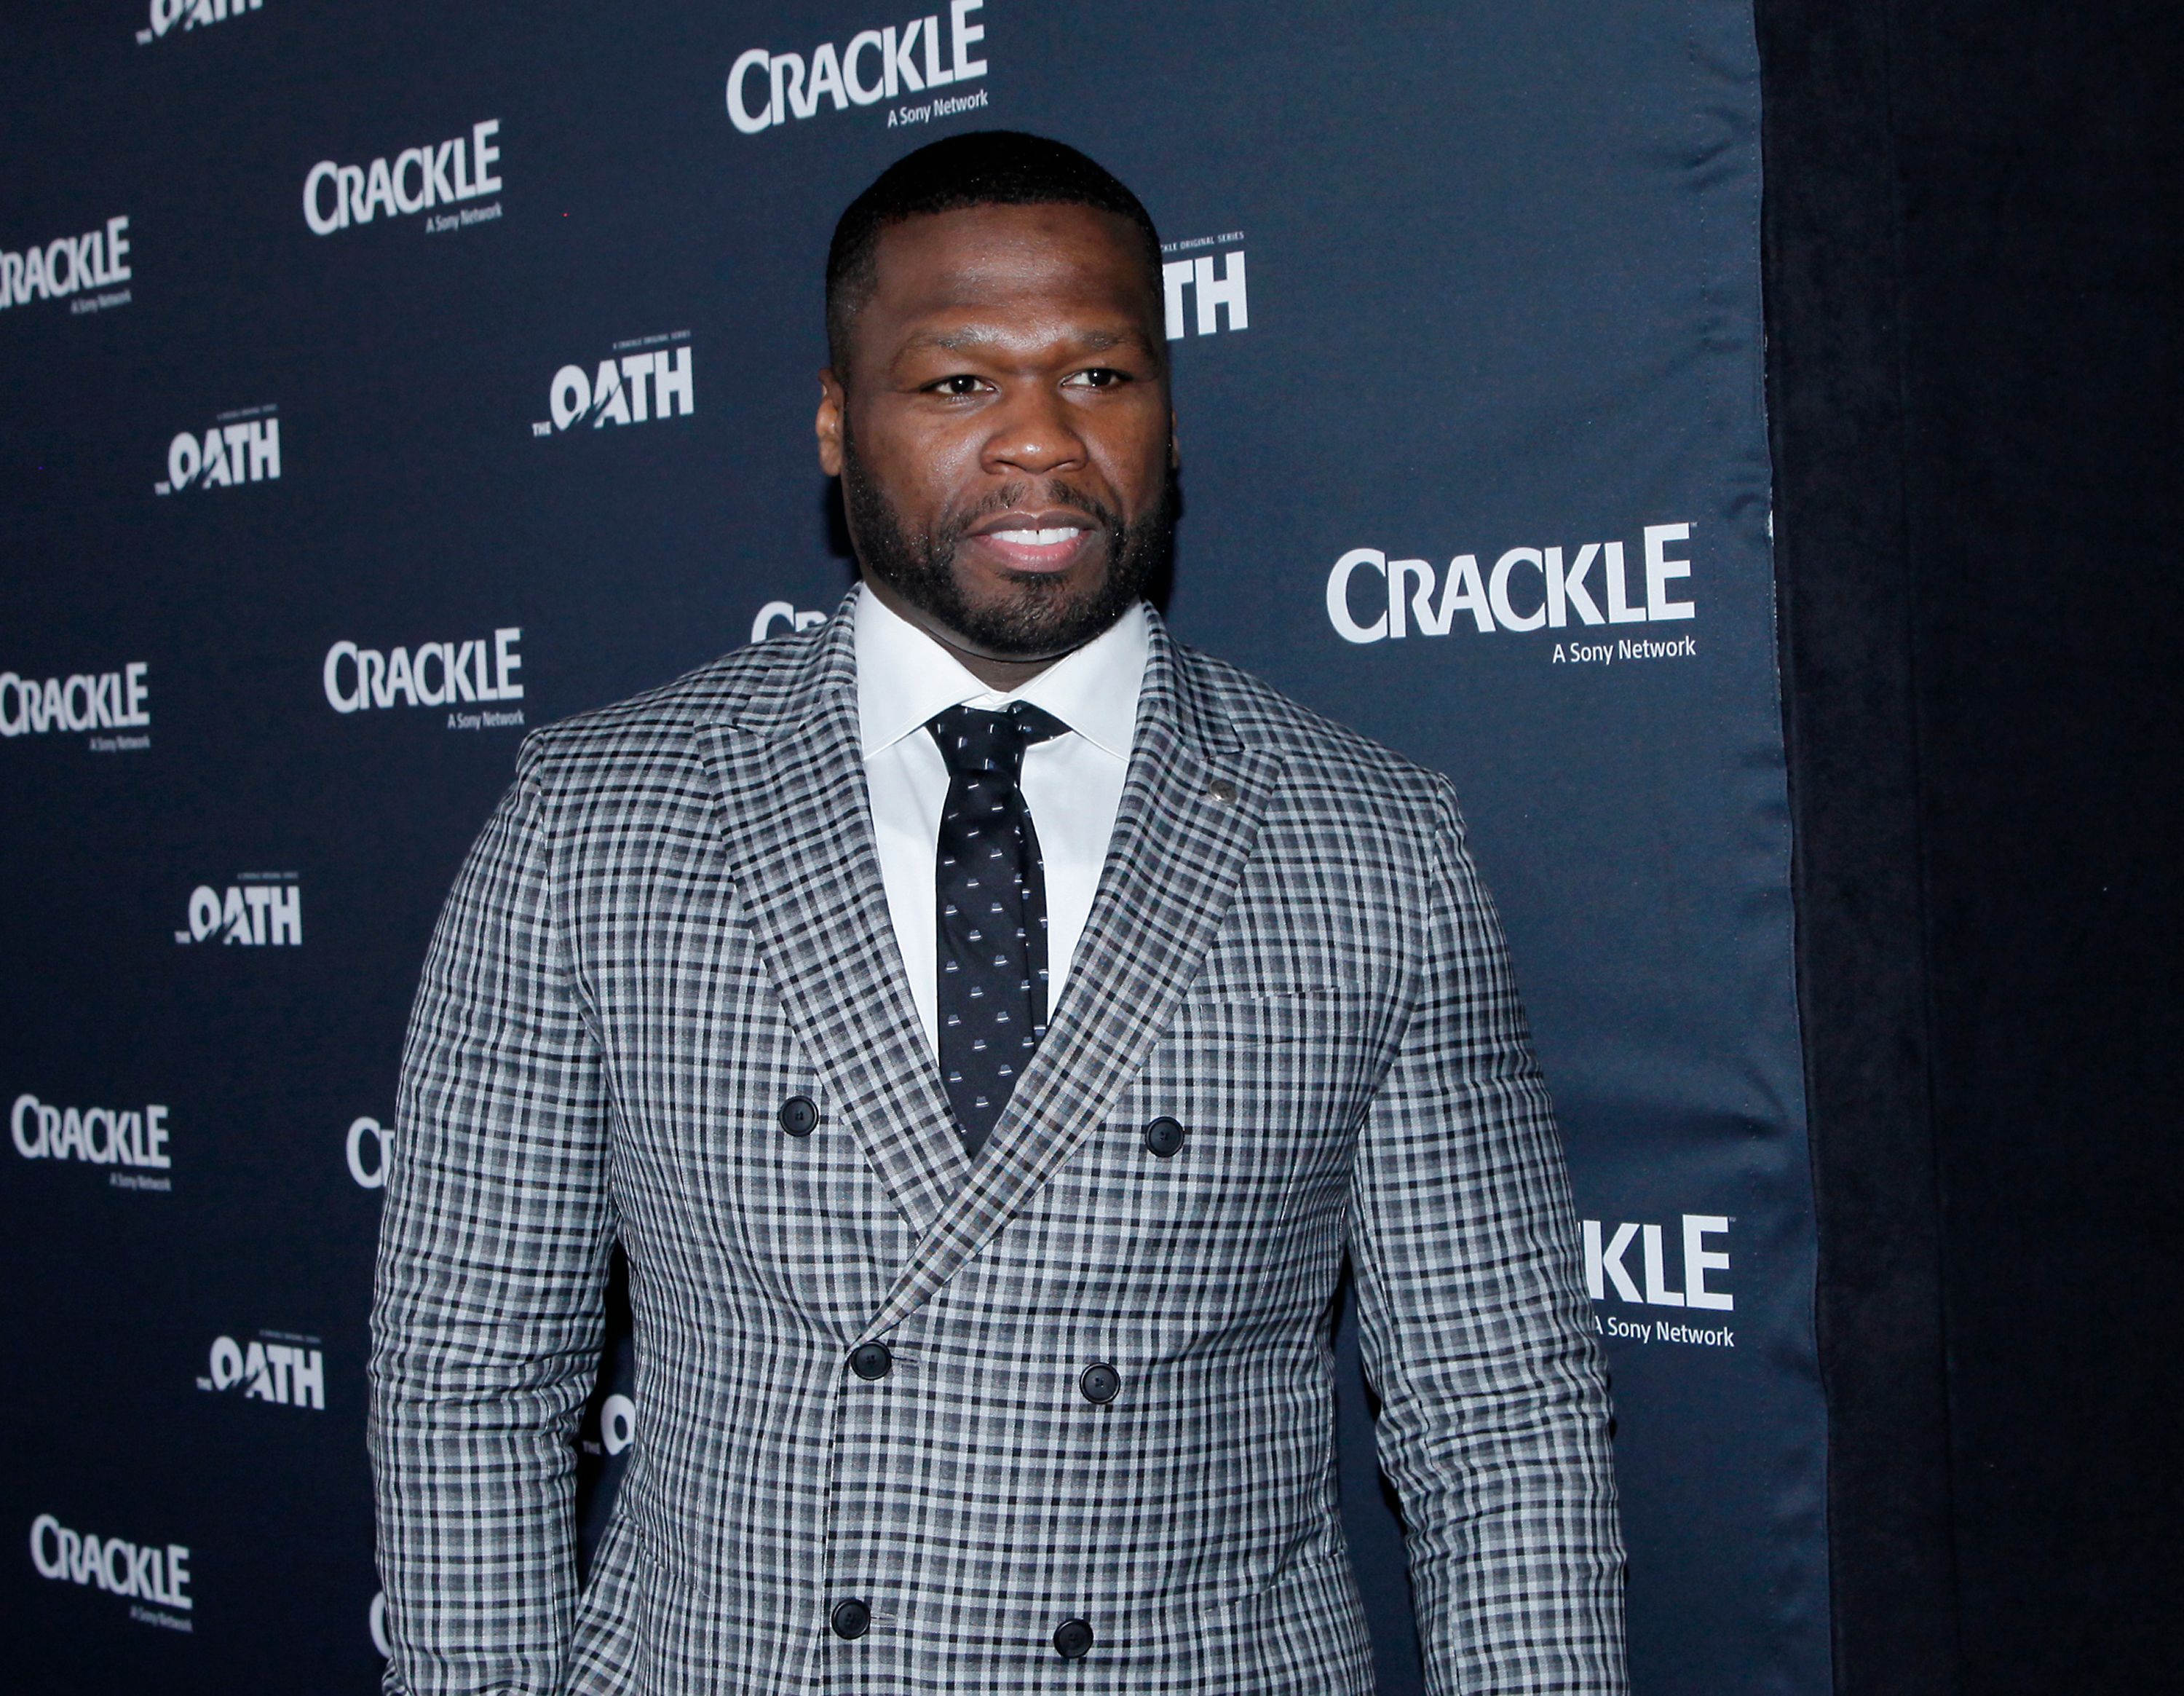 50 Cent at the premiere of Crackle's 'The Oath' at Sony Pictures Studios on March 7, 2018. | Photo: Getty Images